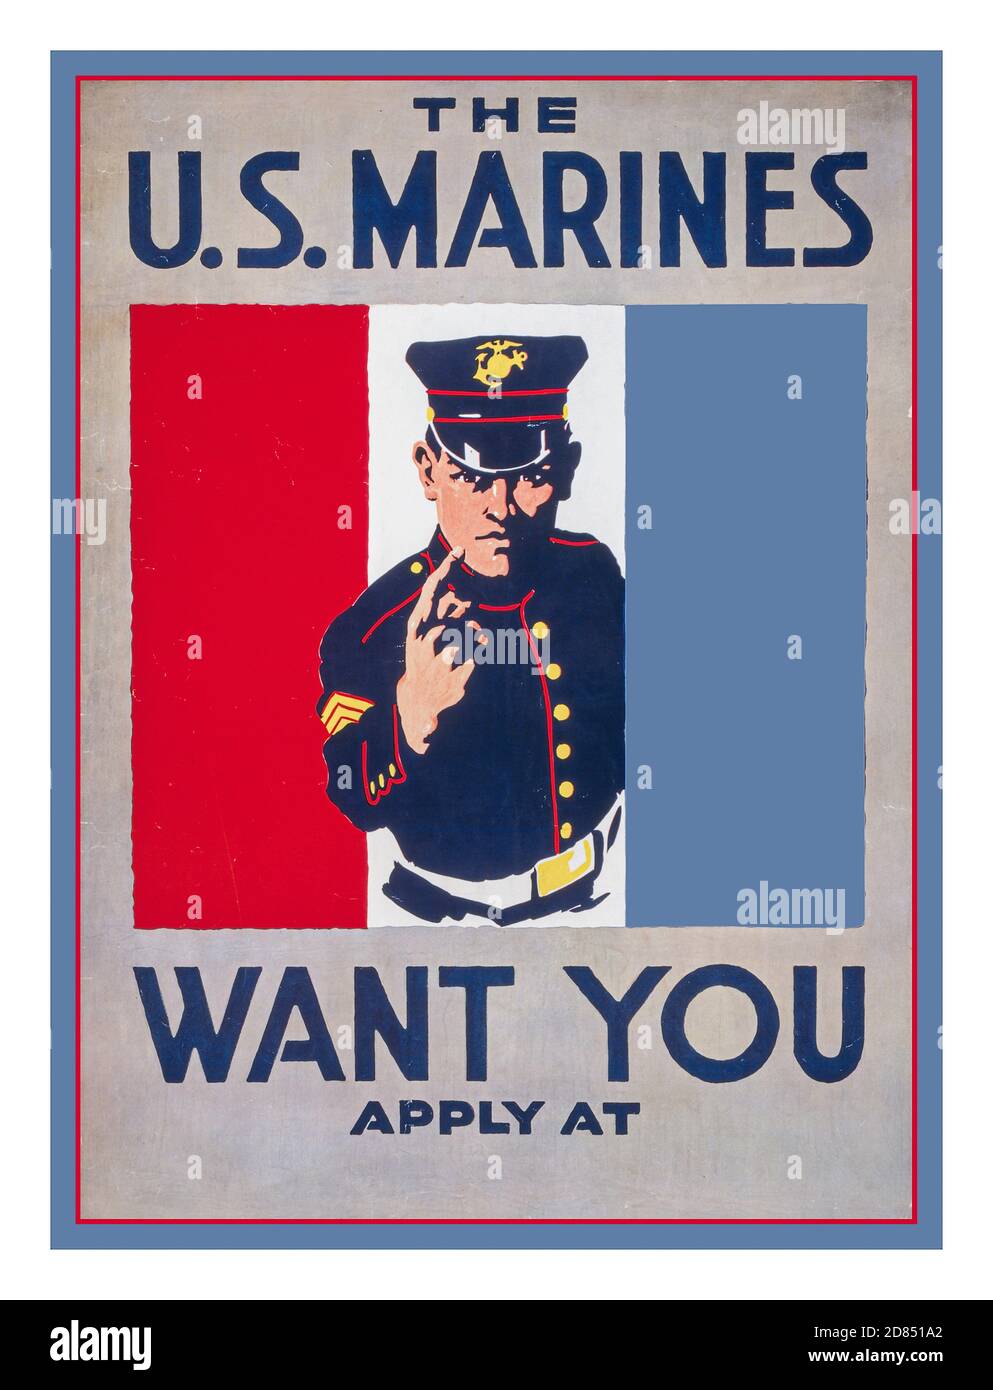 Vintage 1917 Recruiting Propaganda Poster World War 1 ‘The U.S. Marines want you'   Charles Buckles 1874-1960, artist Date Created/Published: [1917] (poster) : lithograph, color ;  Poster shows a marine beckoning to potential recruits to apply & sign up  WW1 First World War Stock Photo